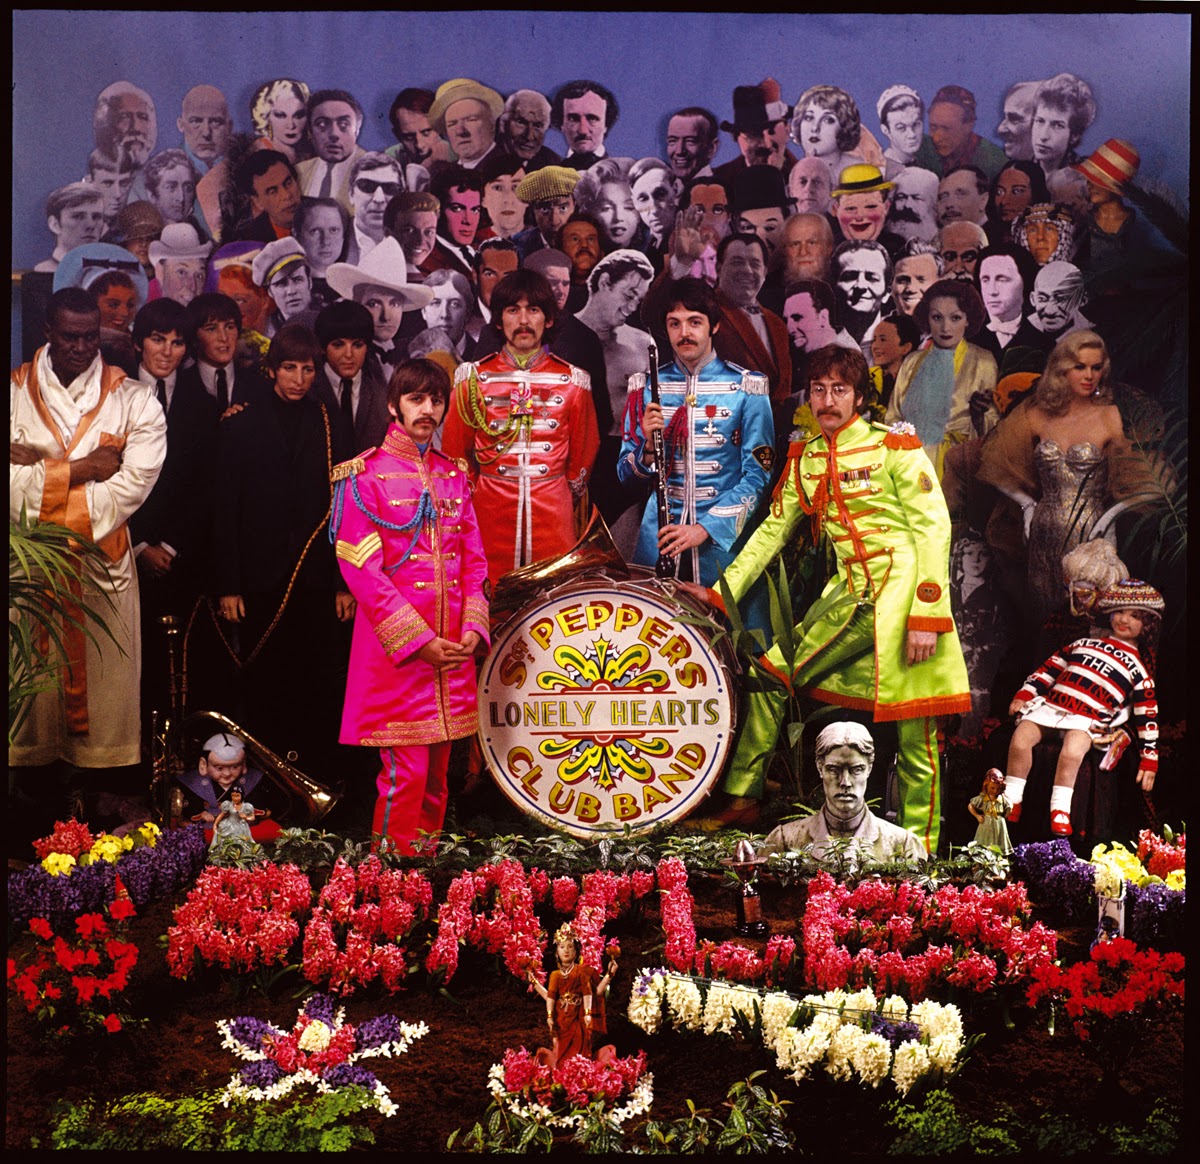 Making The Cover for Sgt Pepper’s Lonely Hearts Club Band (11).jpg